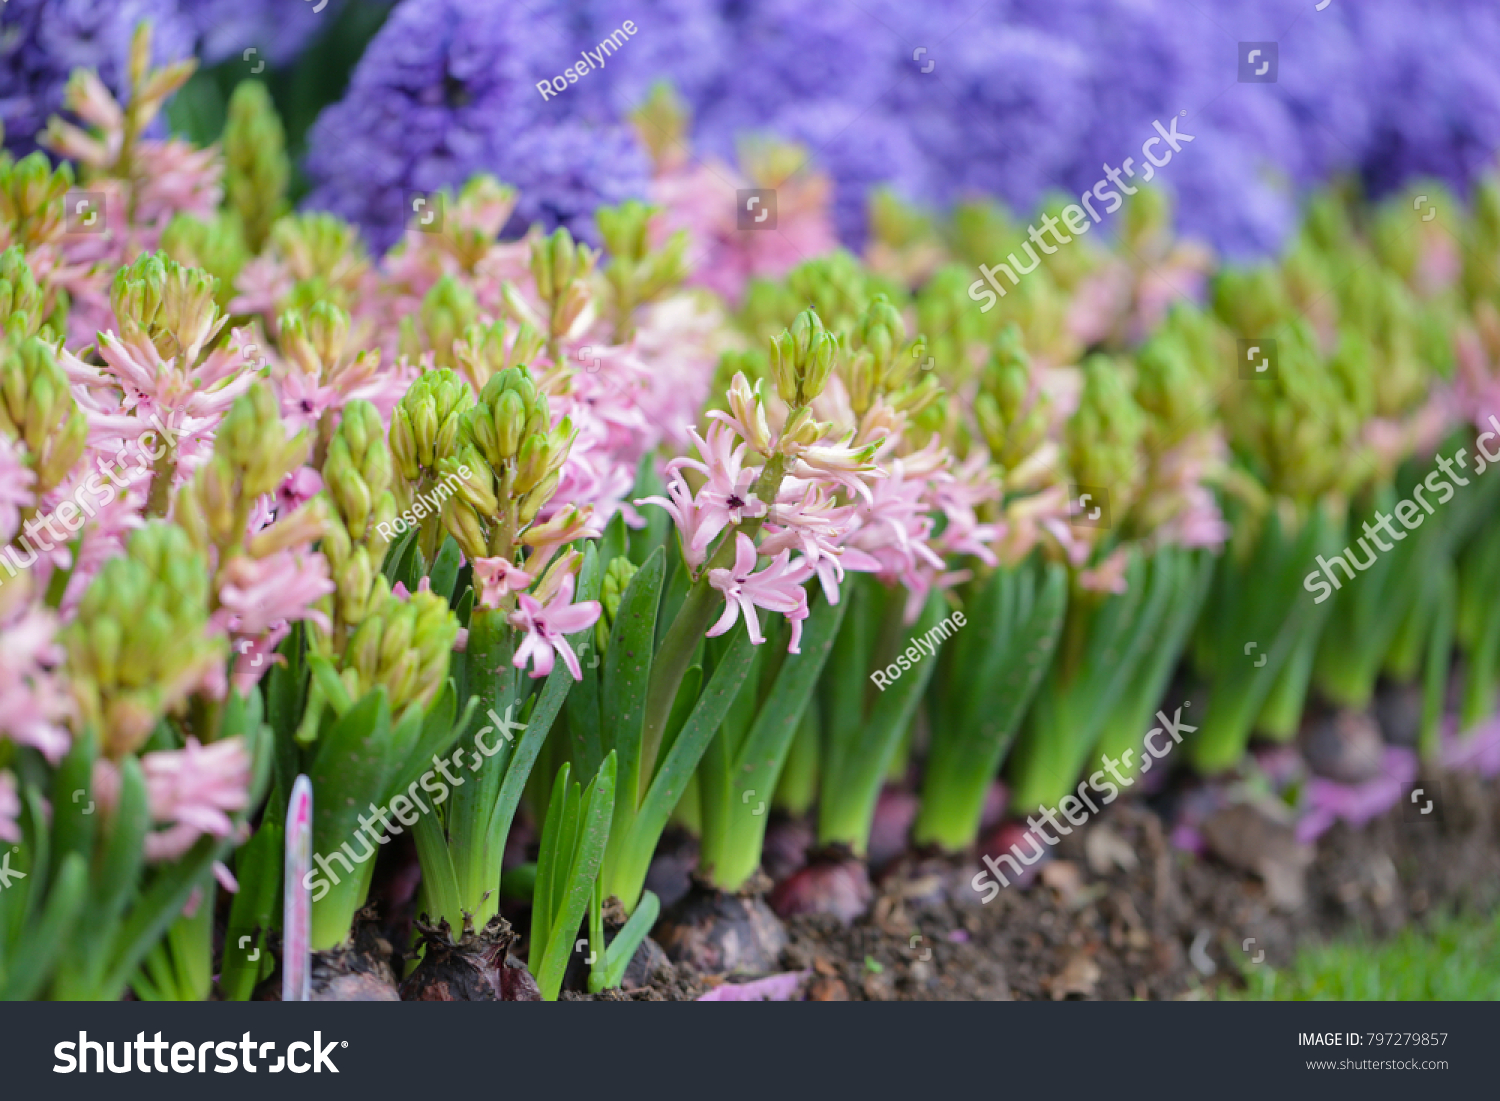 Hyacinths in garden, pink, white, purple with a wonderful smell and are famous for making perfume #797279857